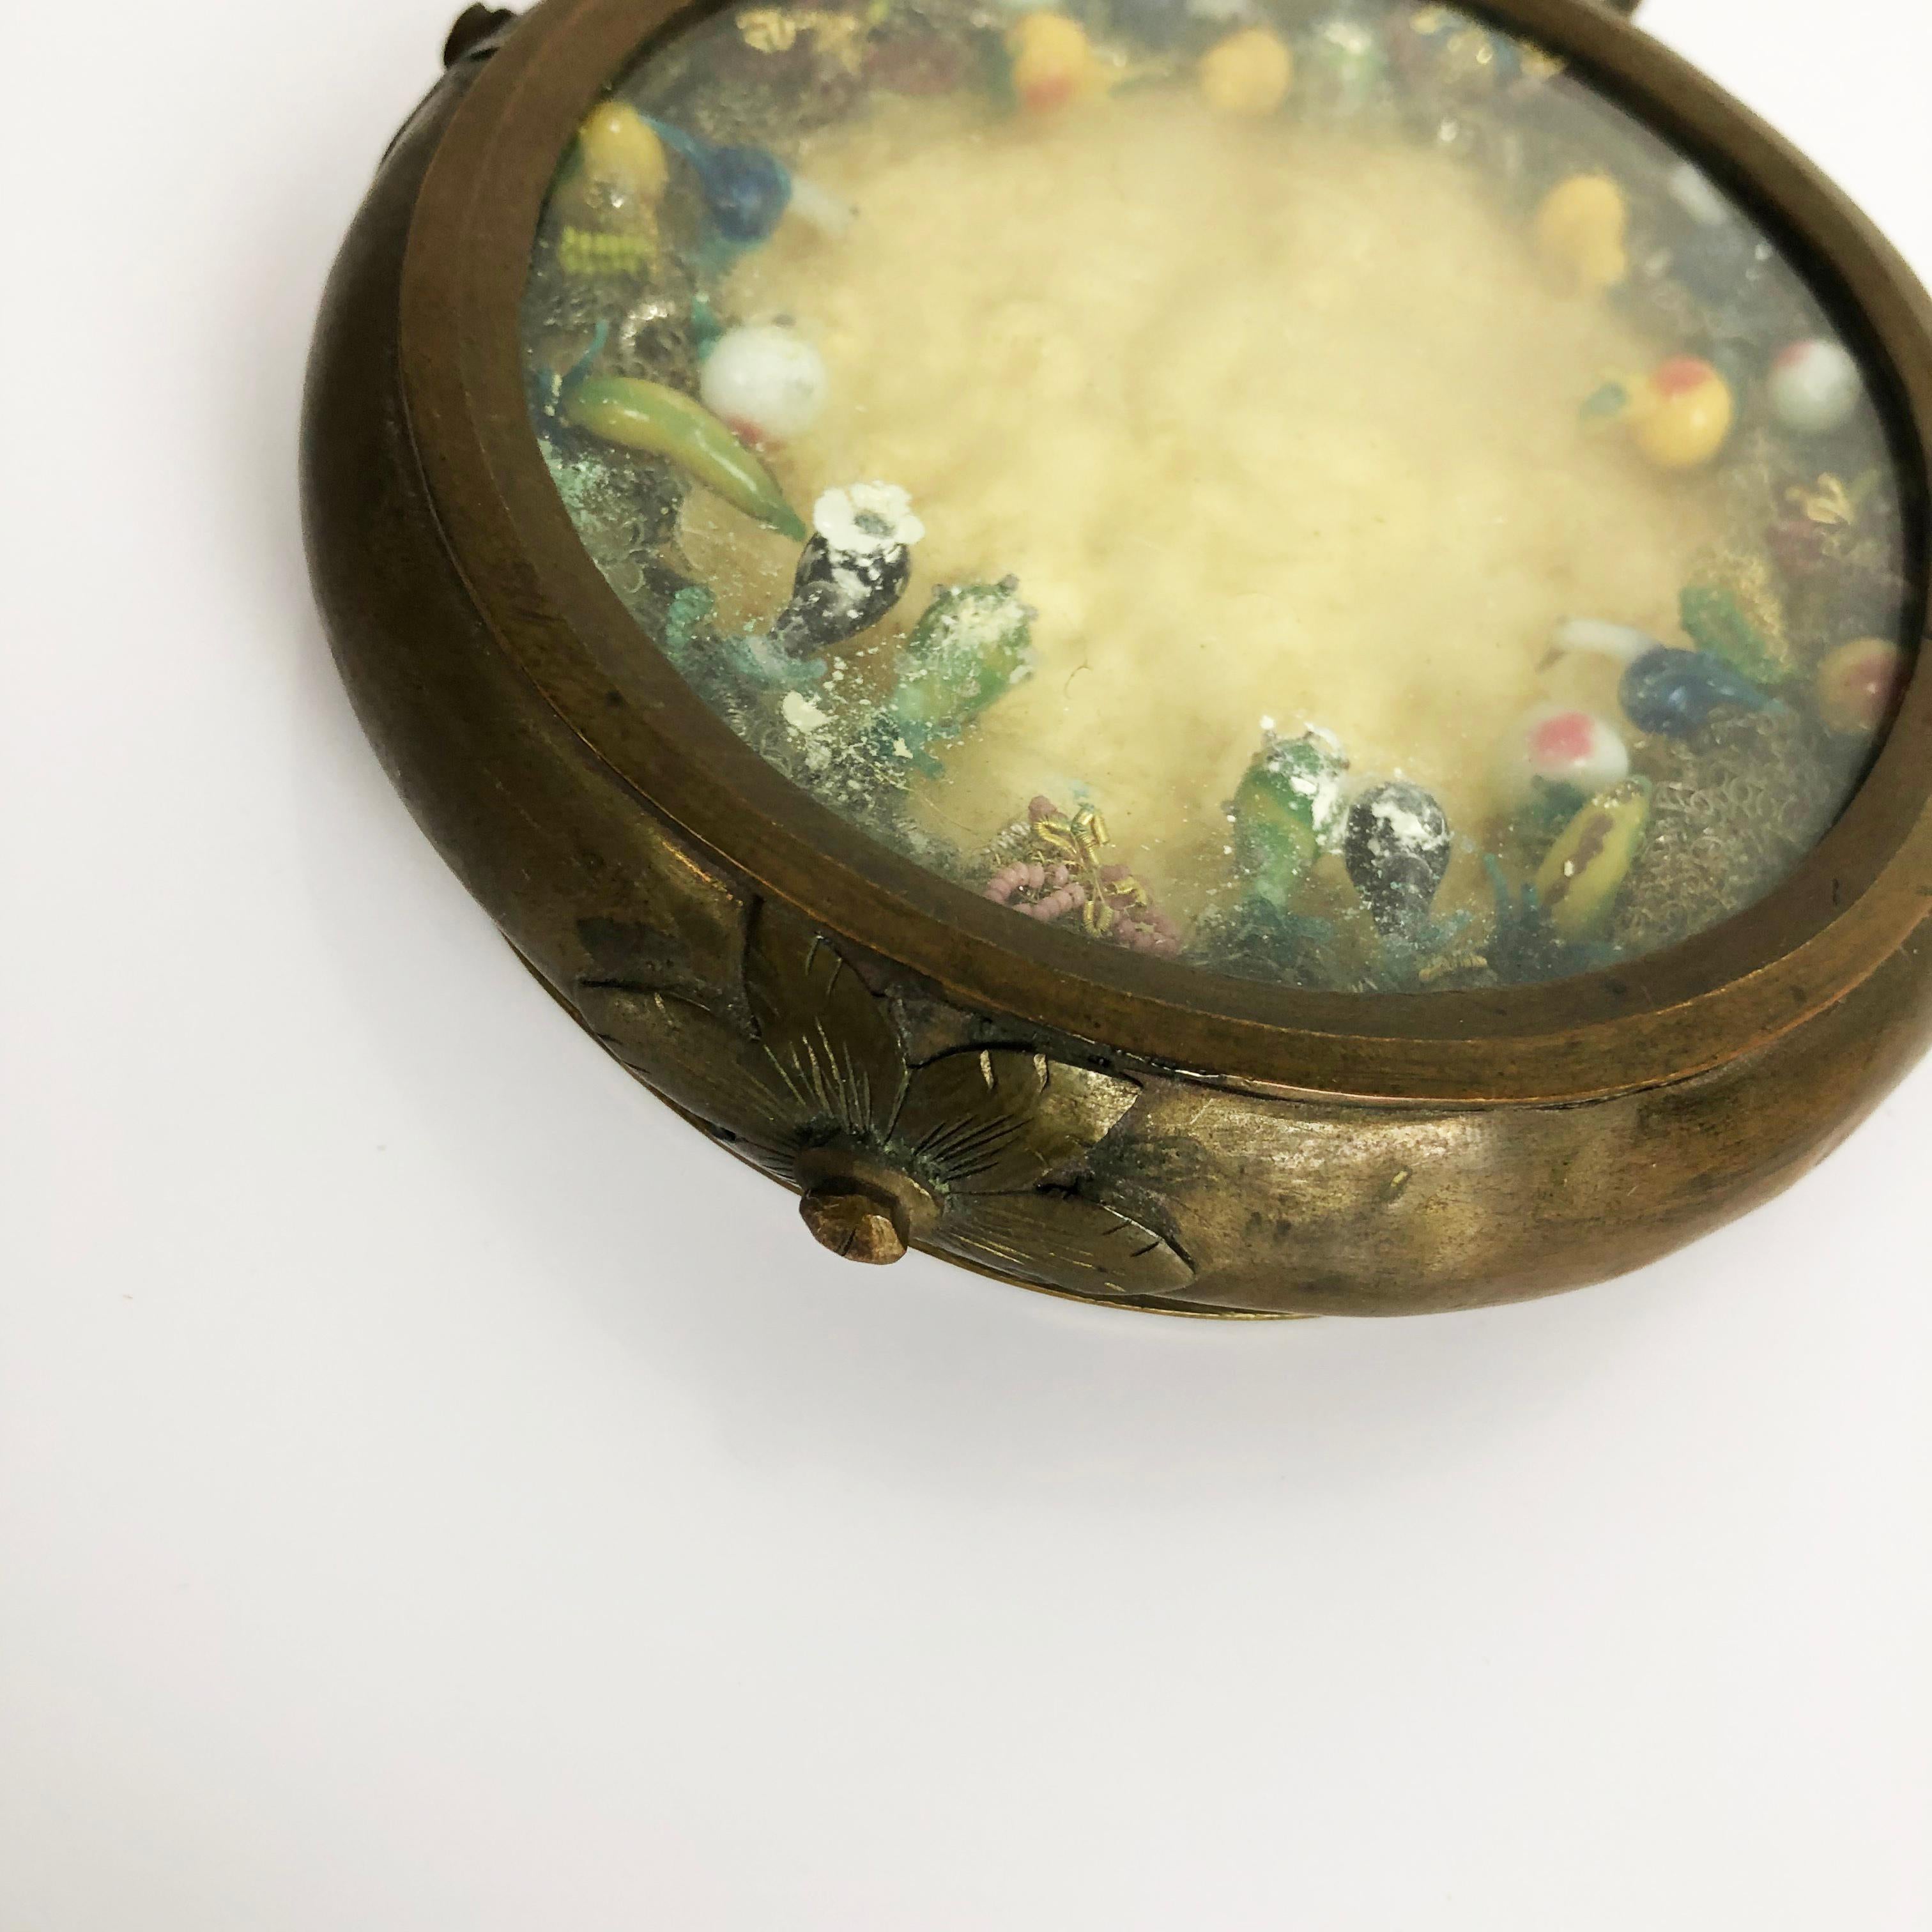 We offer this amazing Reliquary, Inside San José & Niño Dios, with details in blown glass and silver threads.
This type of jewelry always had a great value both for the materials in which they were made and for their religious content.